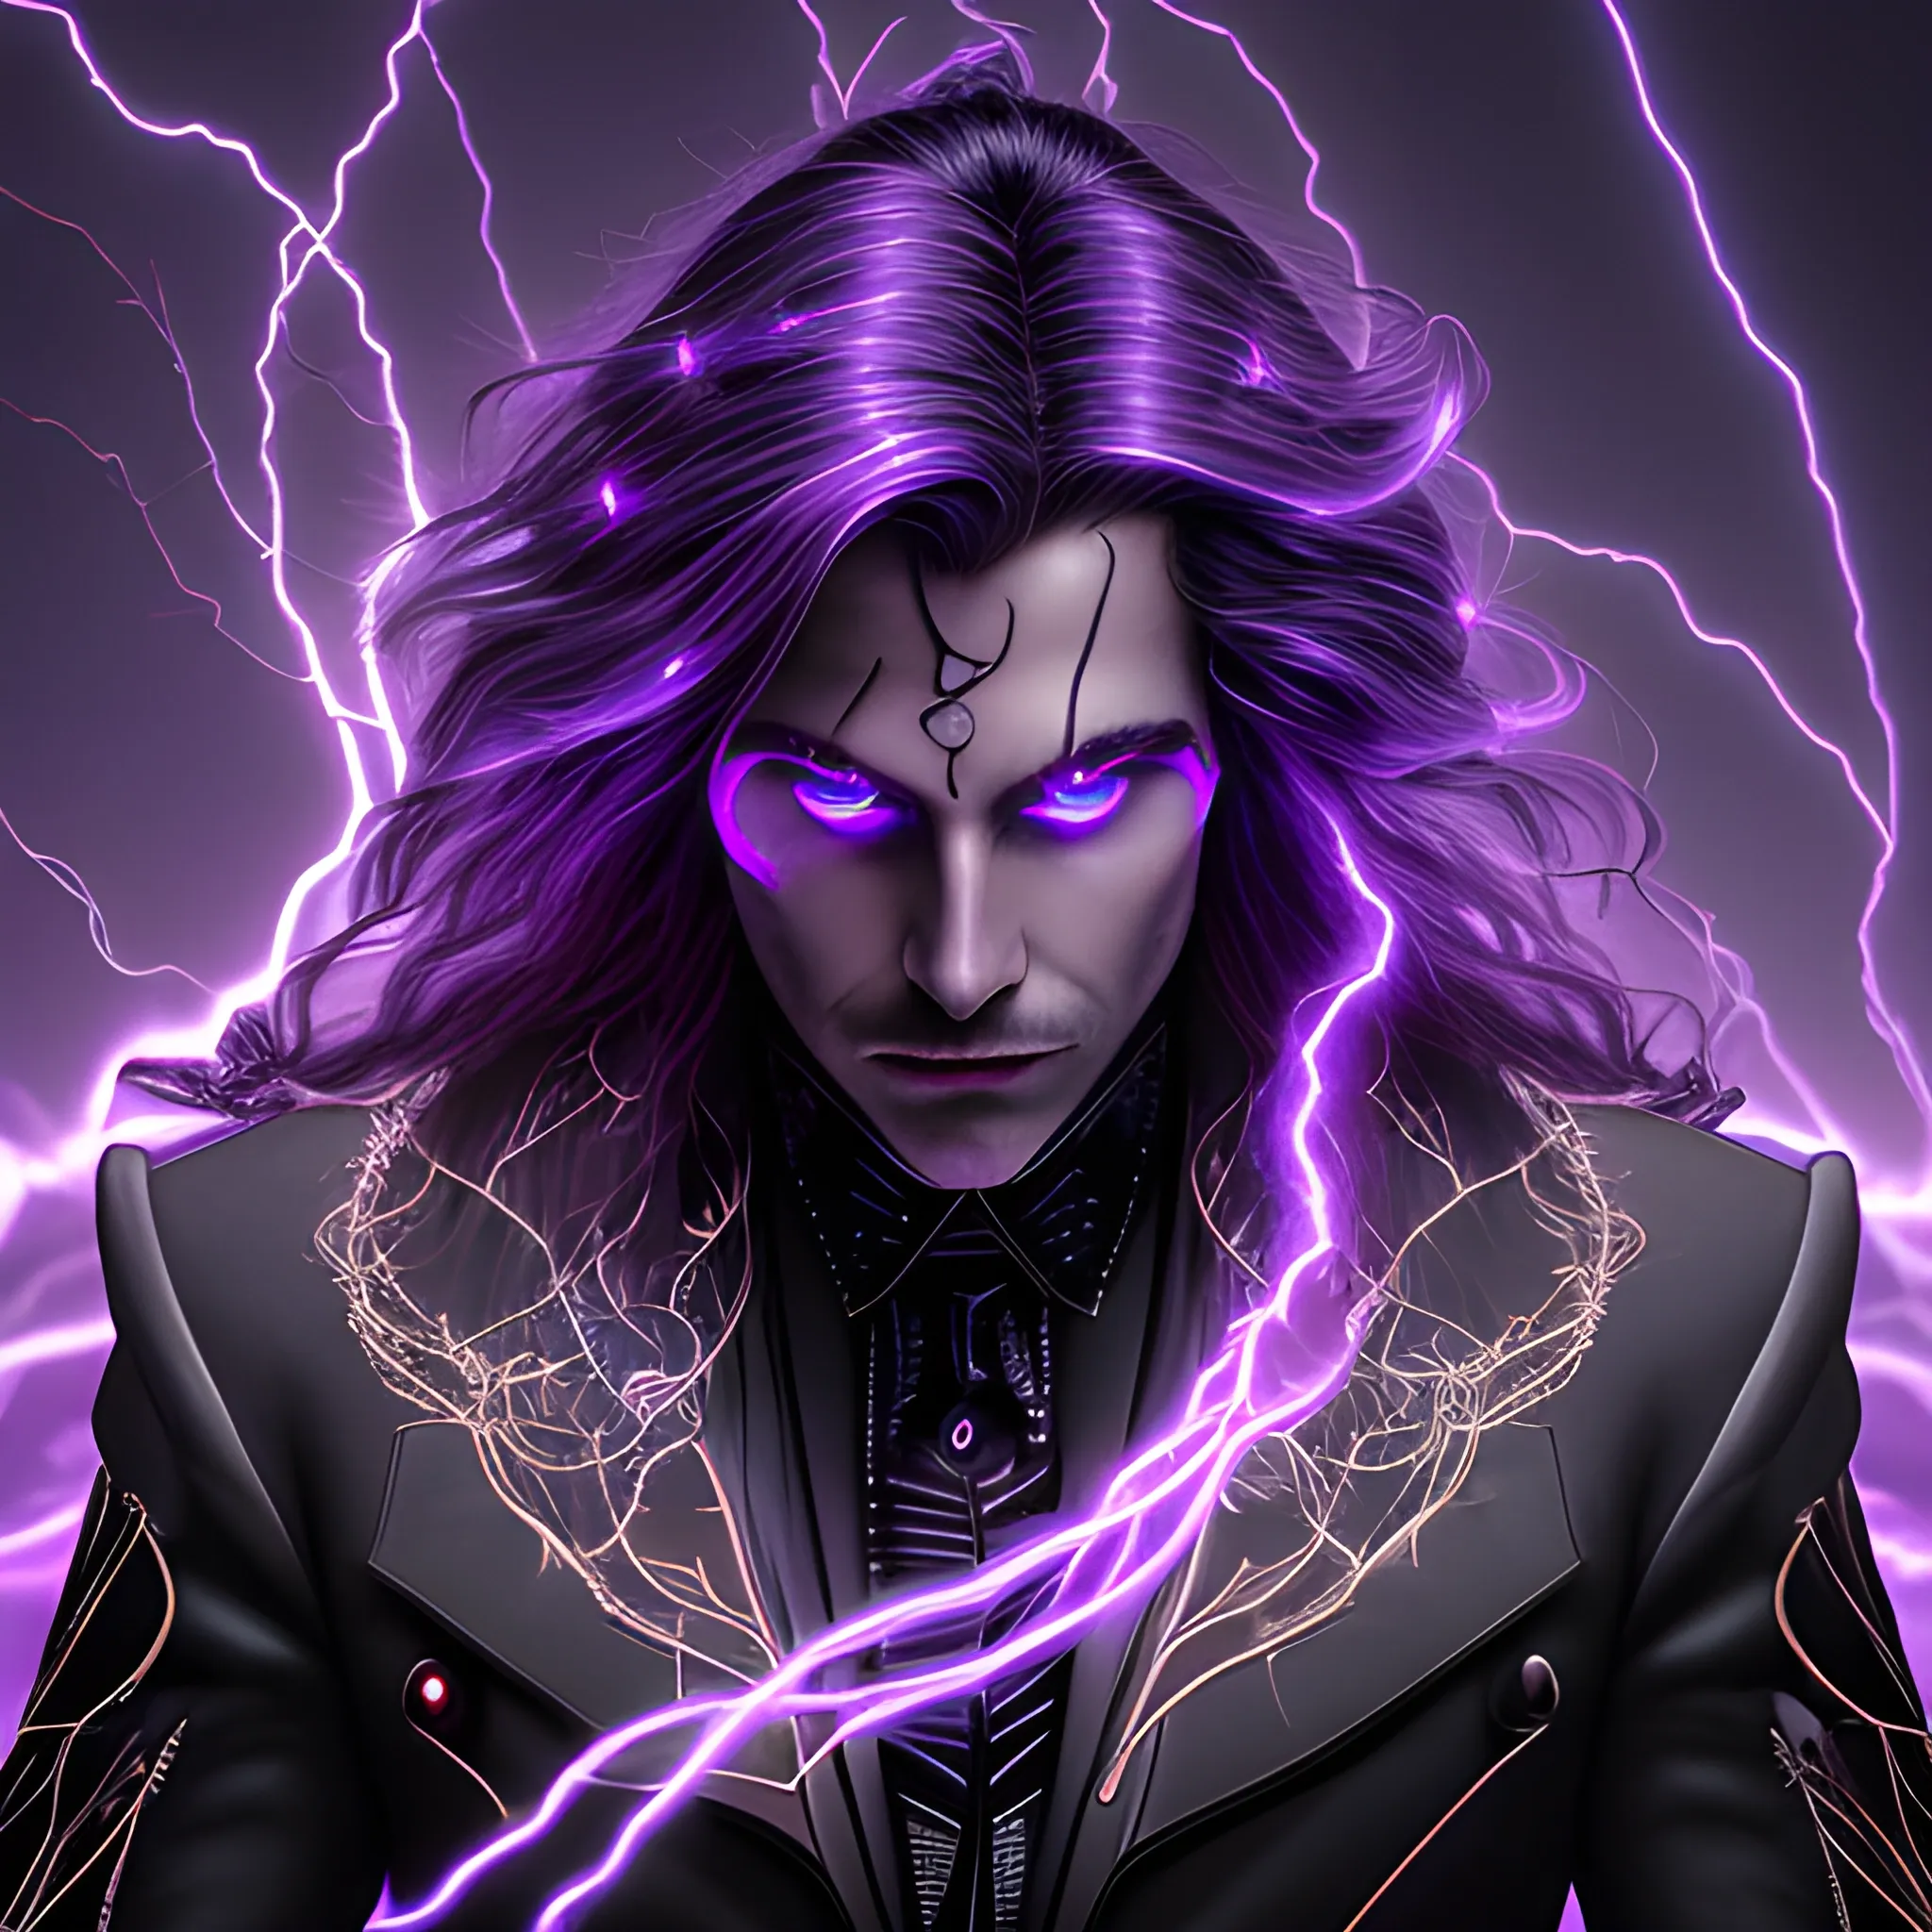 a portrait of a man, glowing eyes, long hair, background lightnings, smog, fantasy, black suit and glowing lights on it, the purple is dominant, elegant, hyperrialistic, ultra detailed, filigree, cable electric wires, feathers, 3/4 view, epic